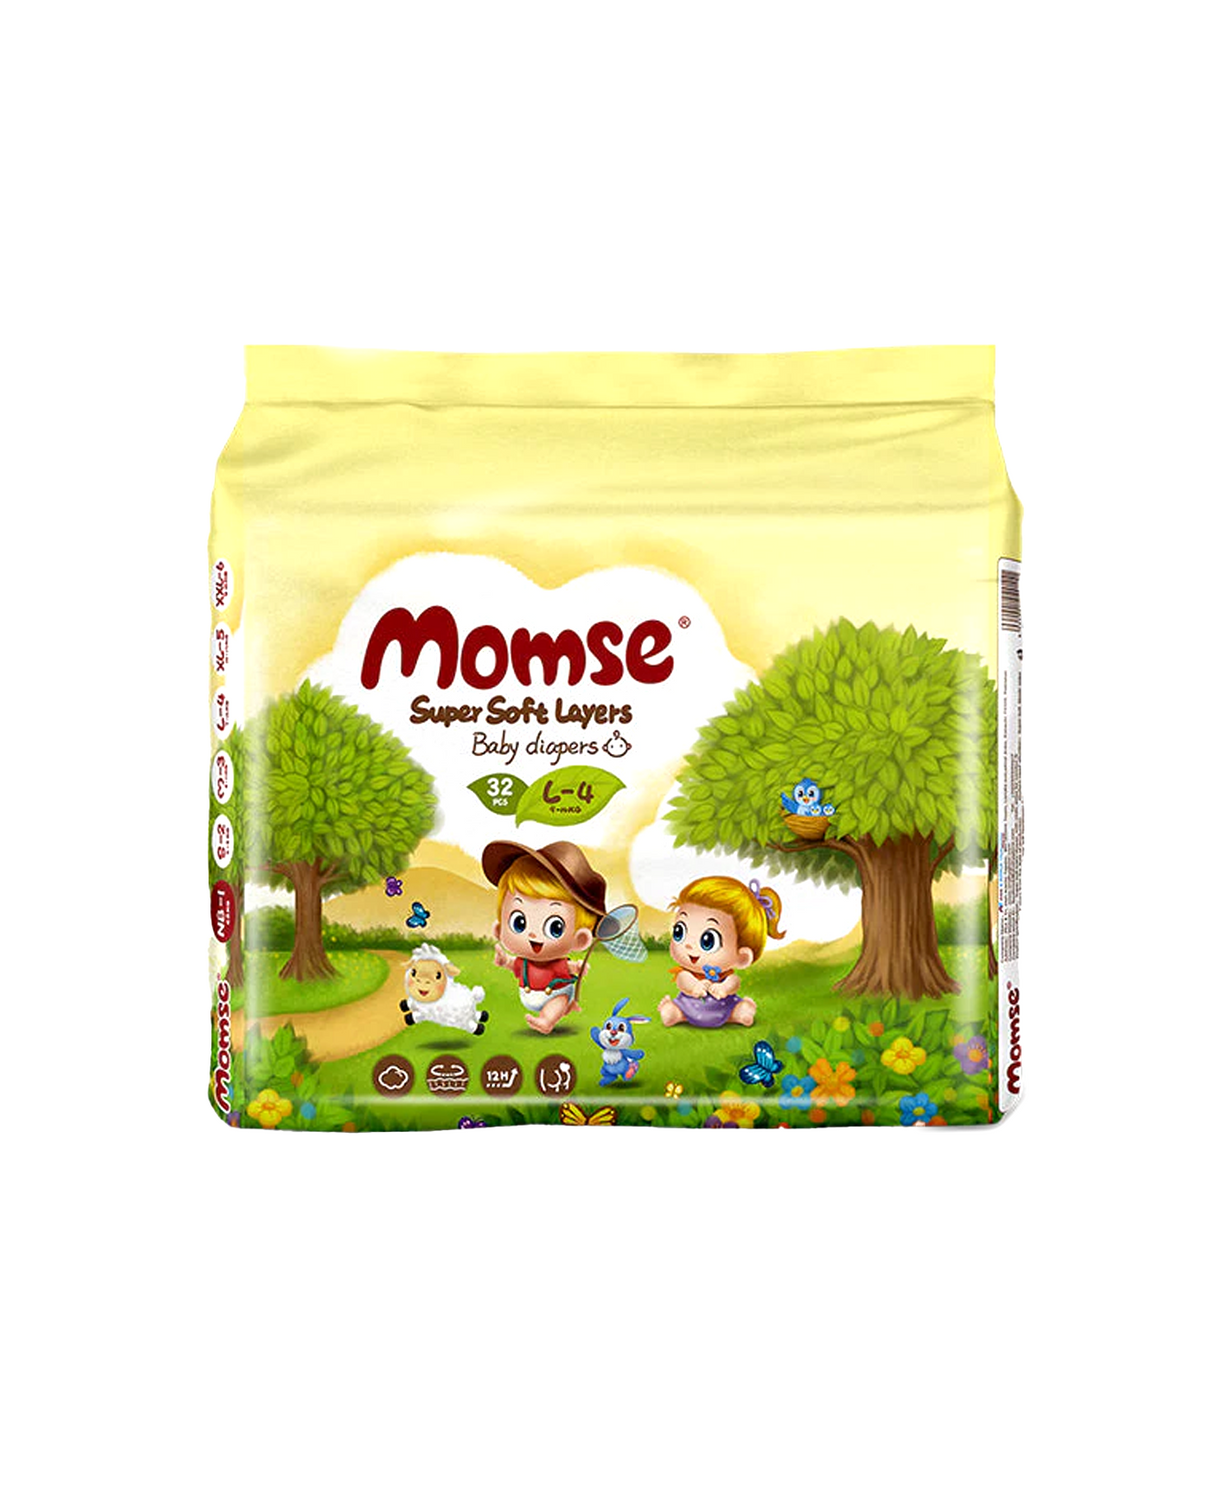 momse diapers economy pack l-4 32pc